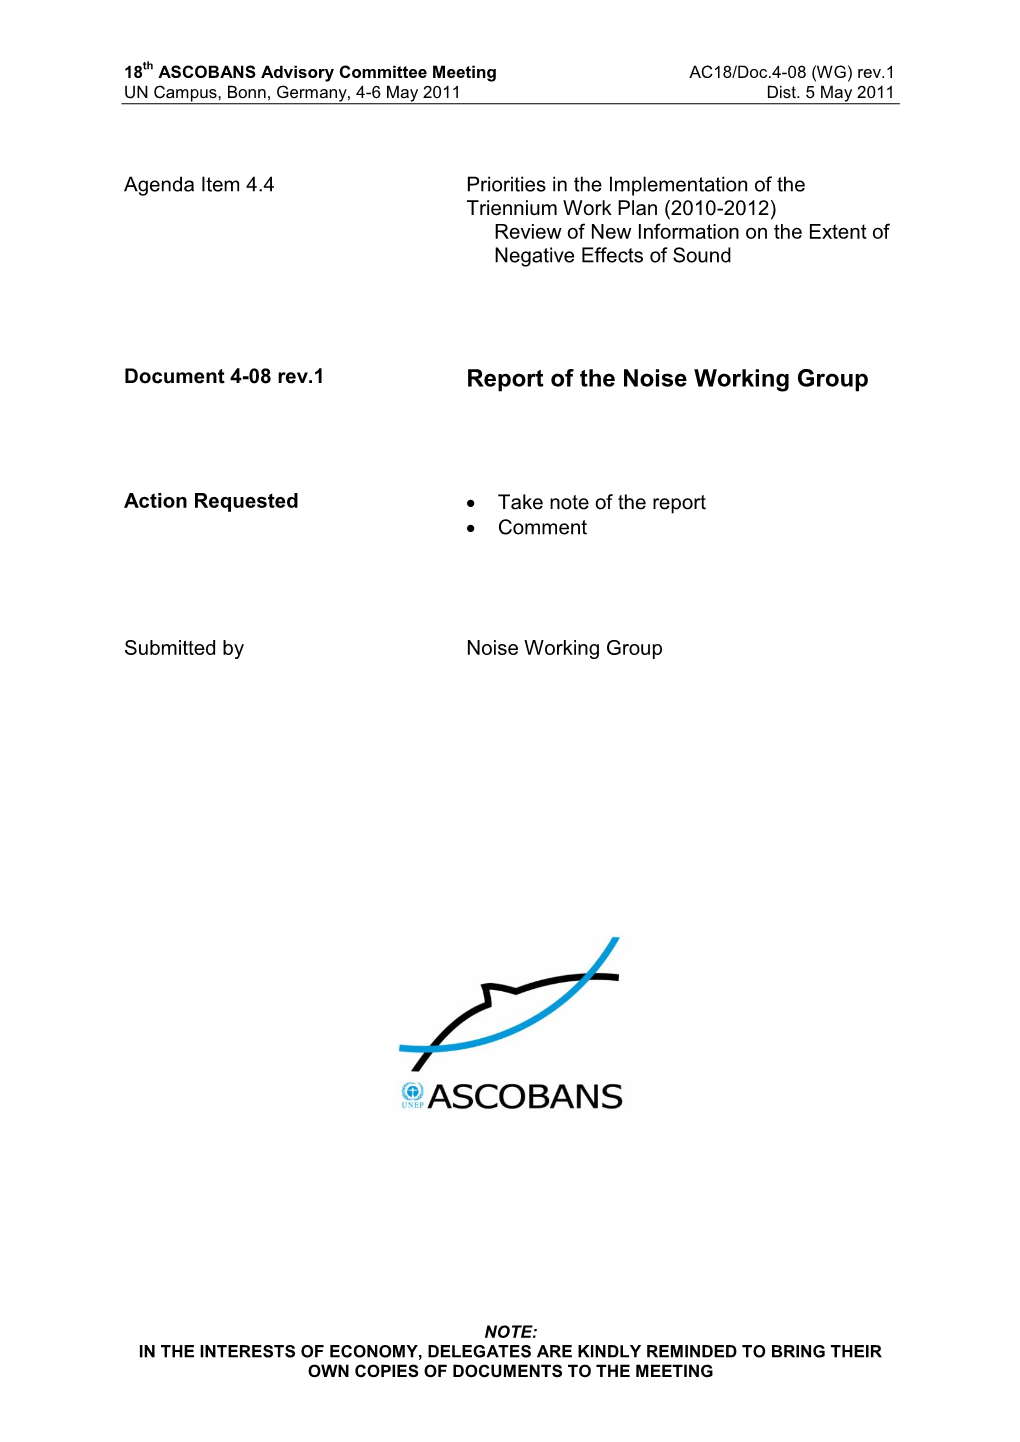 Report of the Noise Working Group